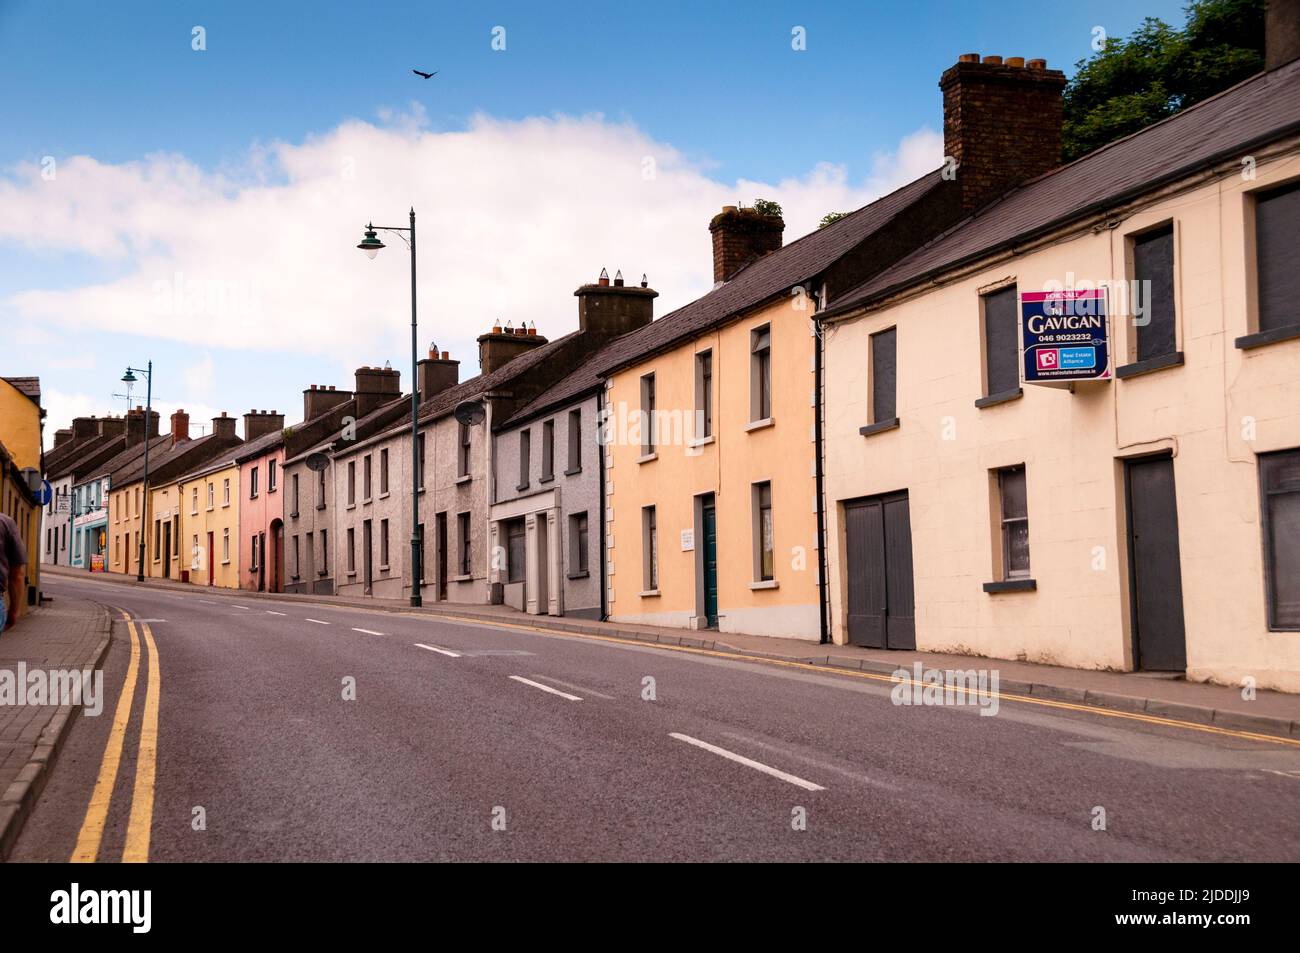 Townhouses in the town of Kells, best know as the site of Kells Abbey, from with the Book of Kells is named. Stock Photo